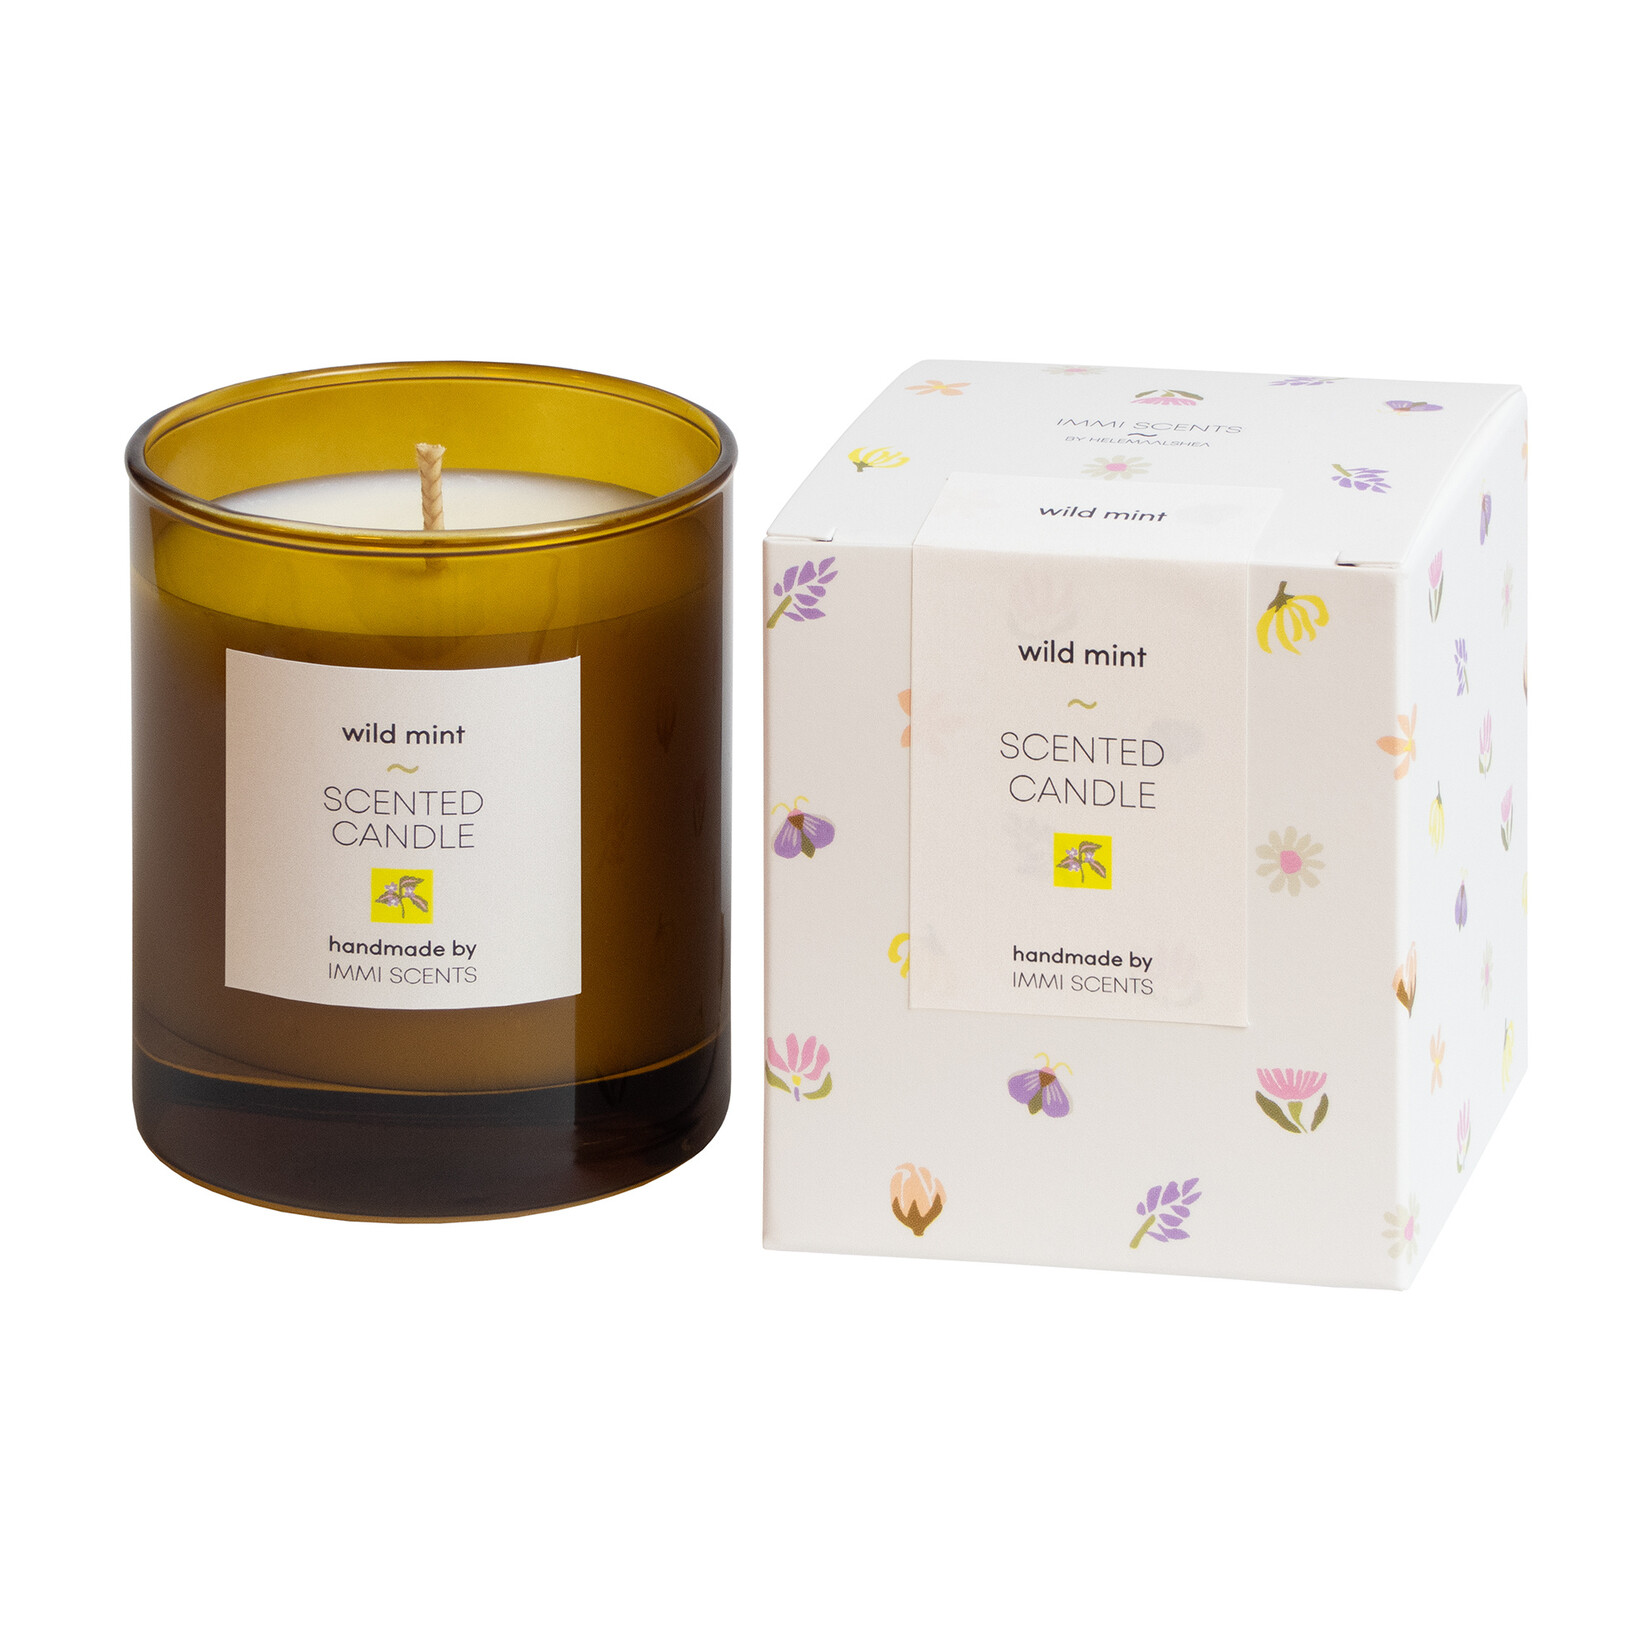 Scented candle - Wild Mint - amber